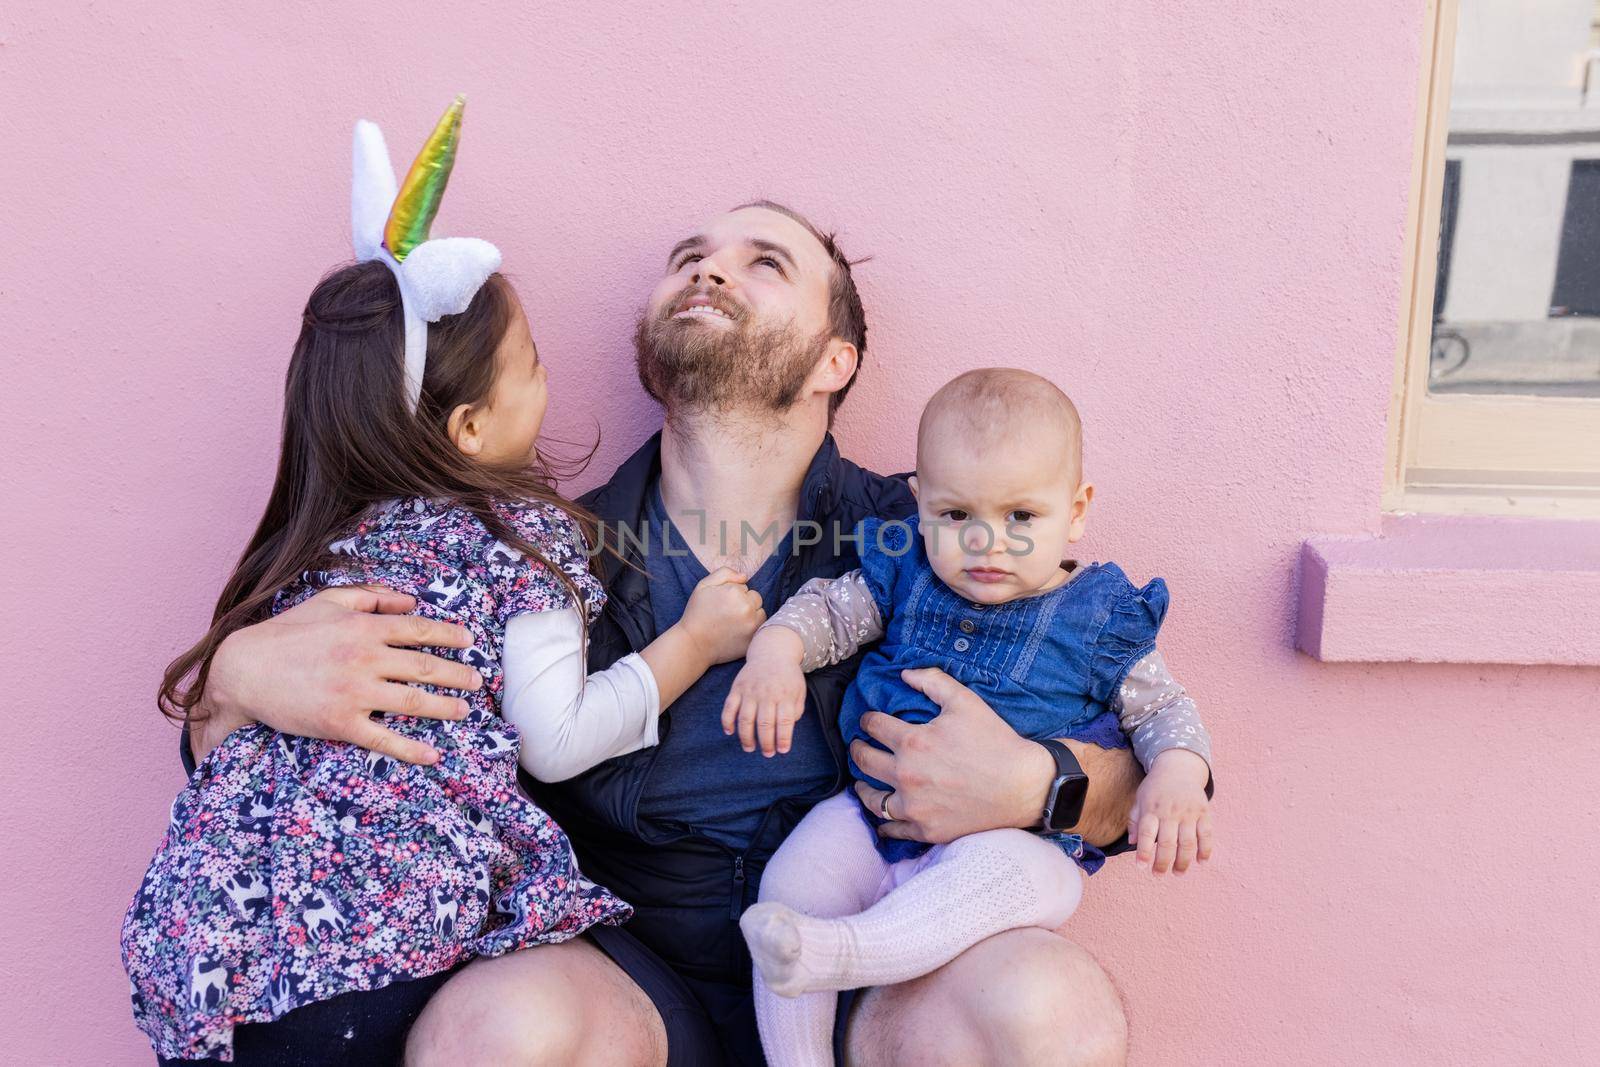 Portrait of young father looking up and hugging adorable baby and little girl in front of a pink wall. Bearded man sitting and holding joyful and cute daughters. Happy family outdoors